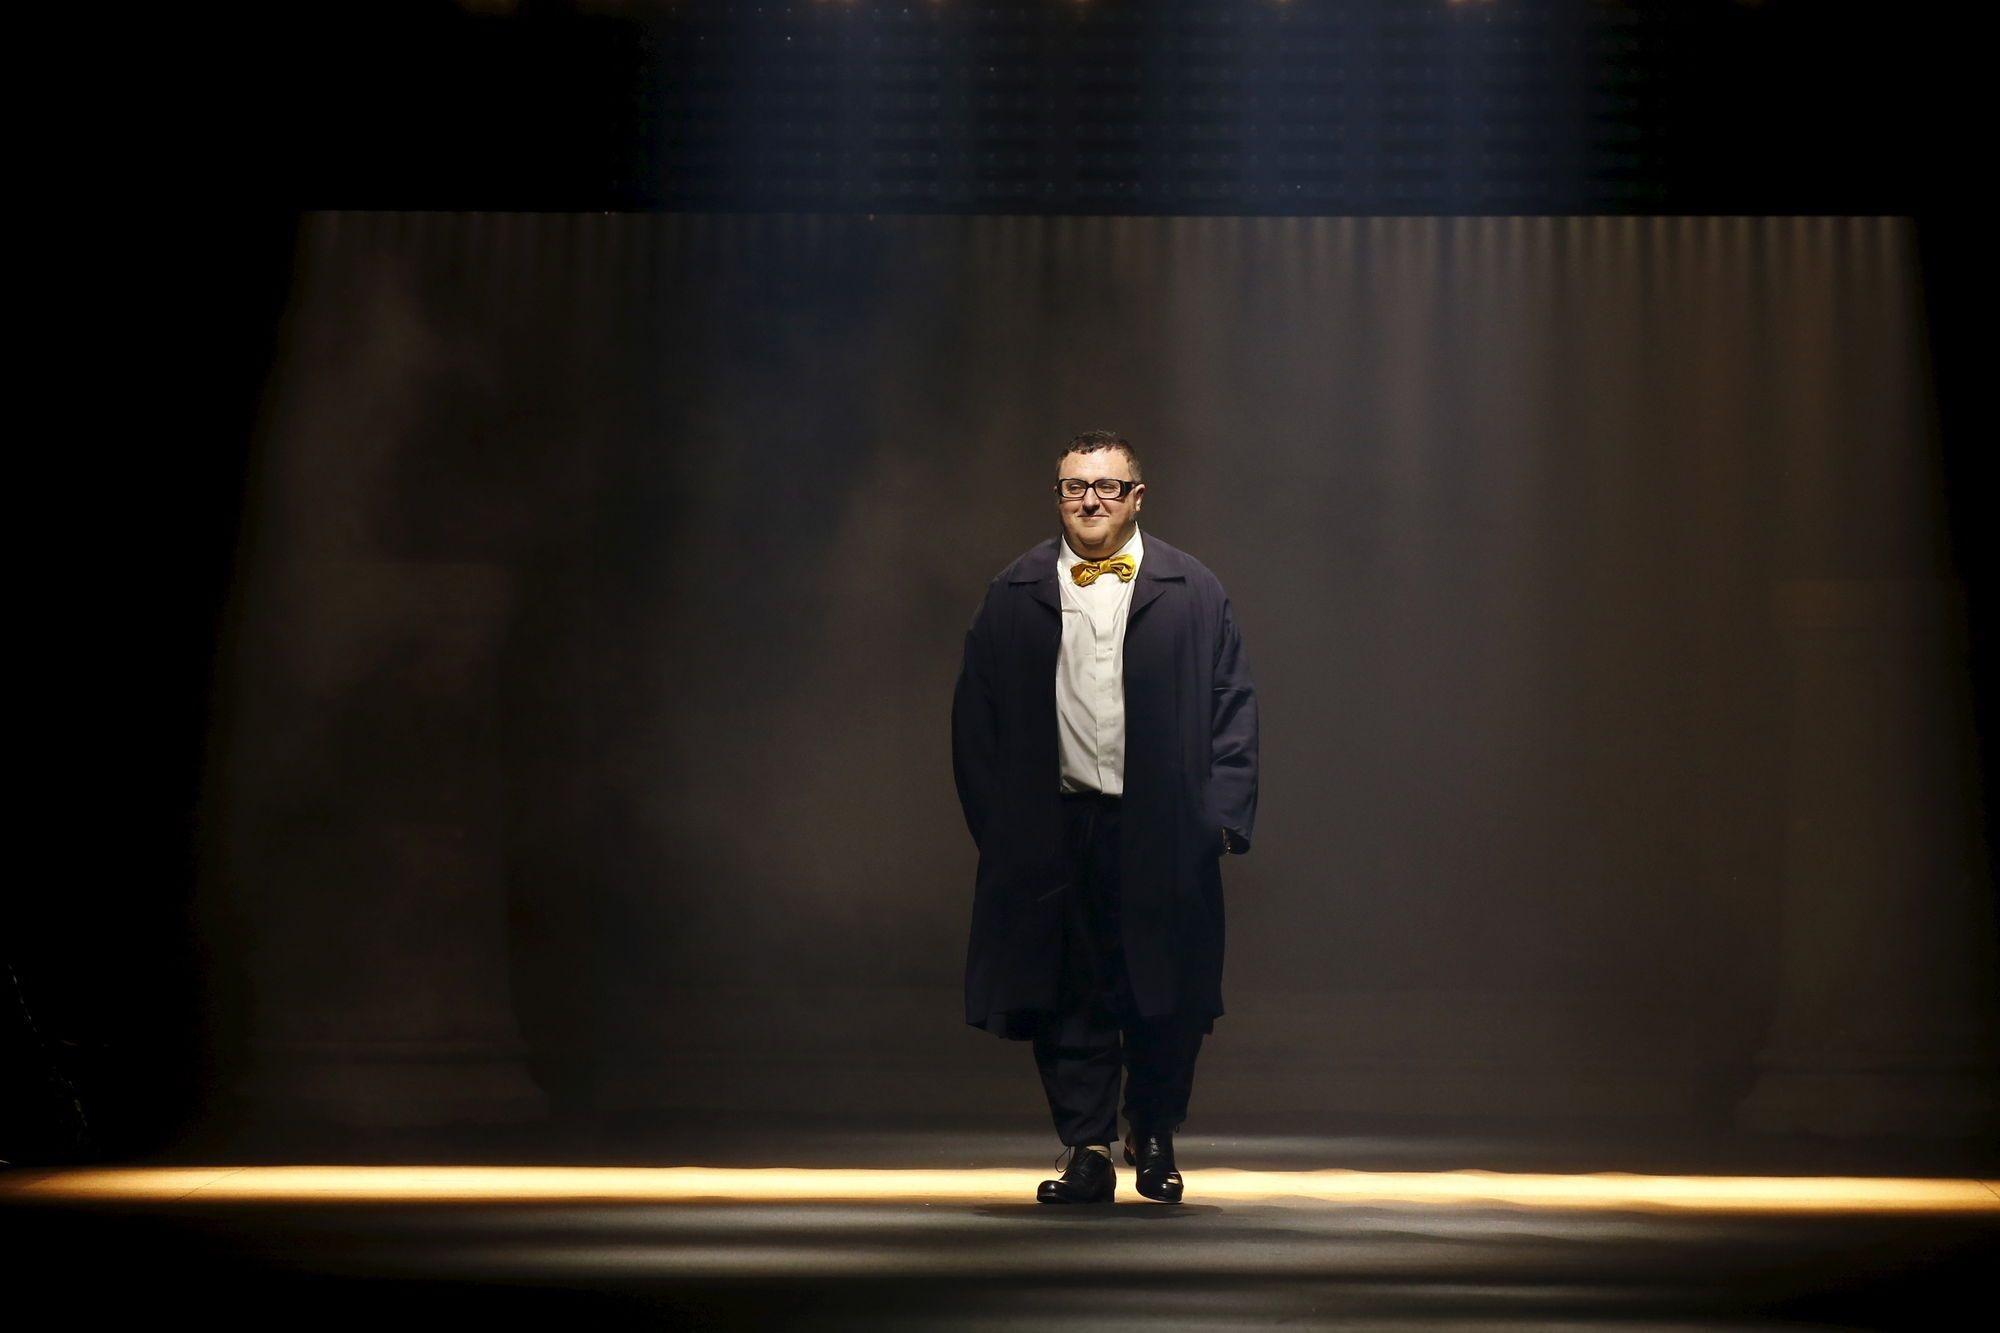 Israeli-American designer Alber Elbaz appears at the end of his Spring/Summer 2016 women's ready-to-wear fashion show for Lanvin in Paris, France, October 1, 2015. REUTERS/Benoit Tessier - RTS2NNM